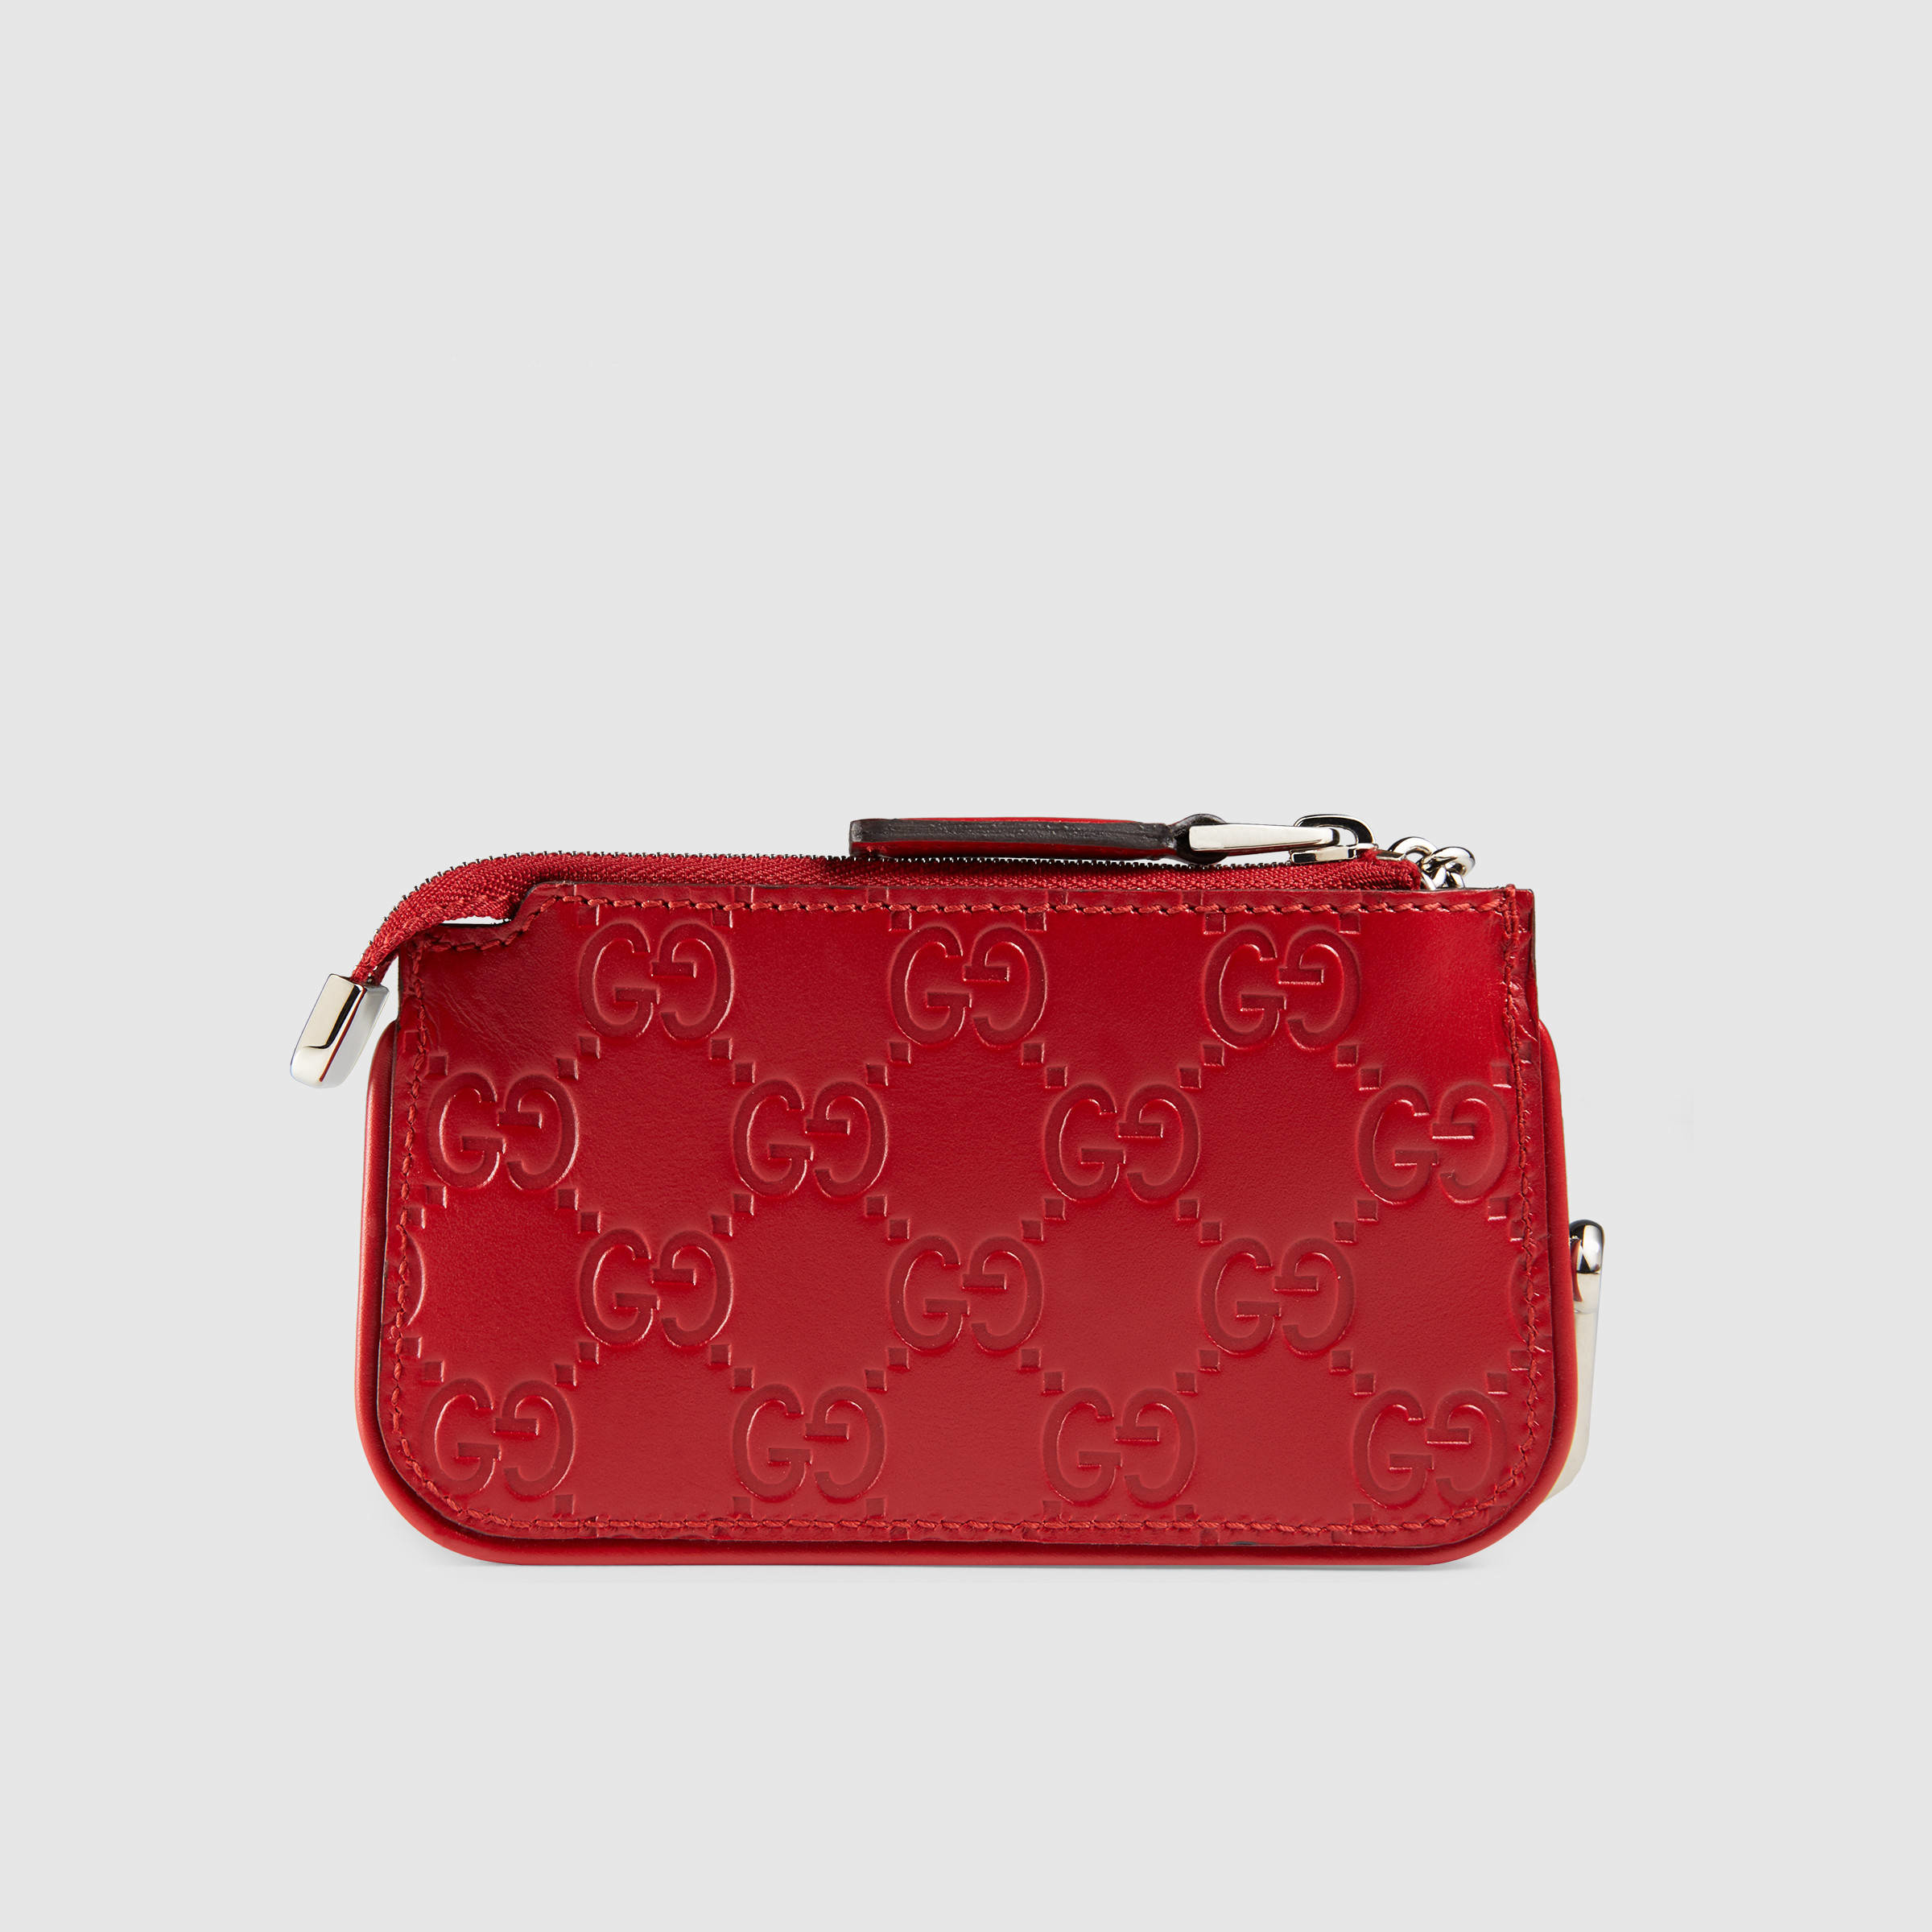 Gucci Signature Leather Key Case in Red